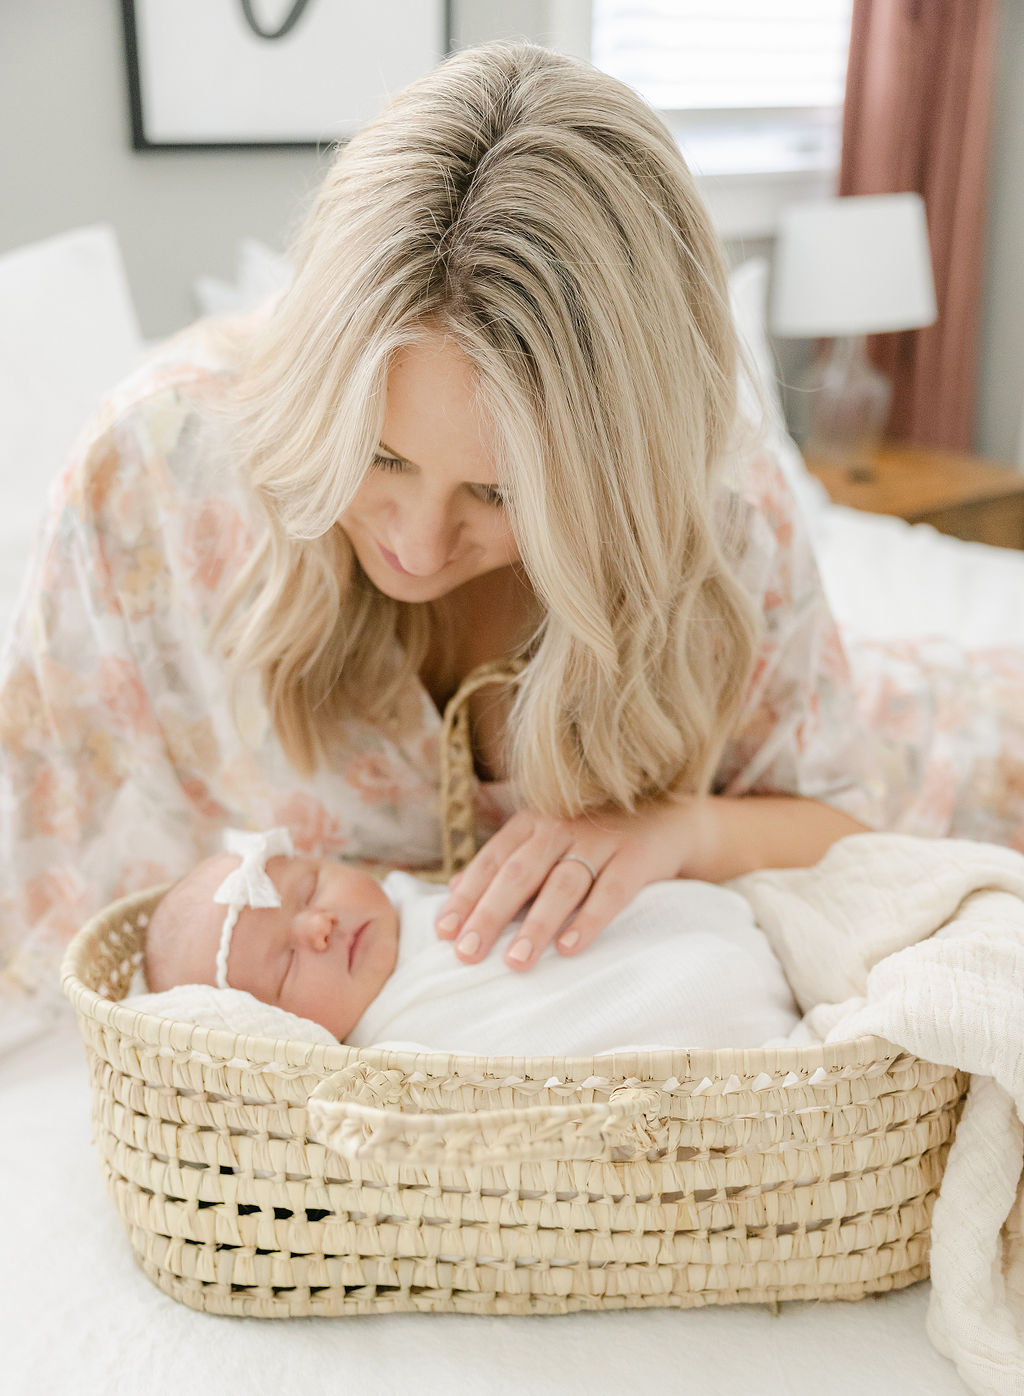 A newborn baby sleeps in a woven basket bed while mother leans over the top looking down on her indianapolis pediatricians